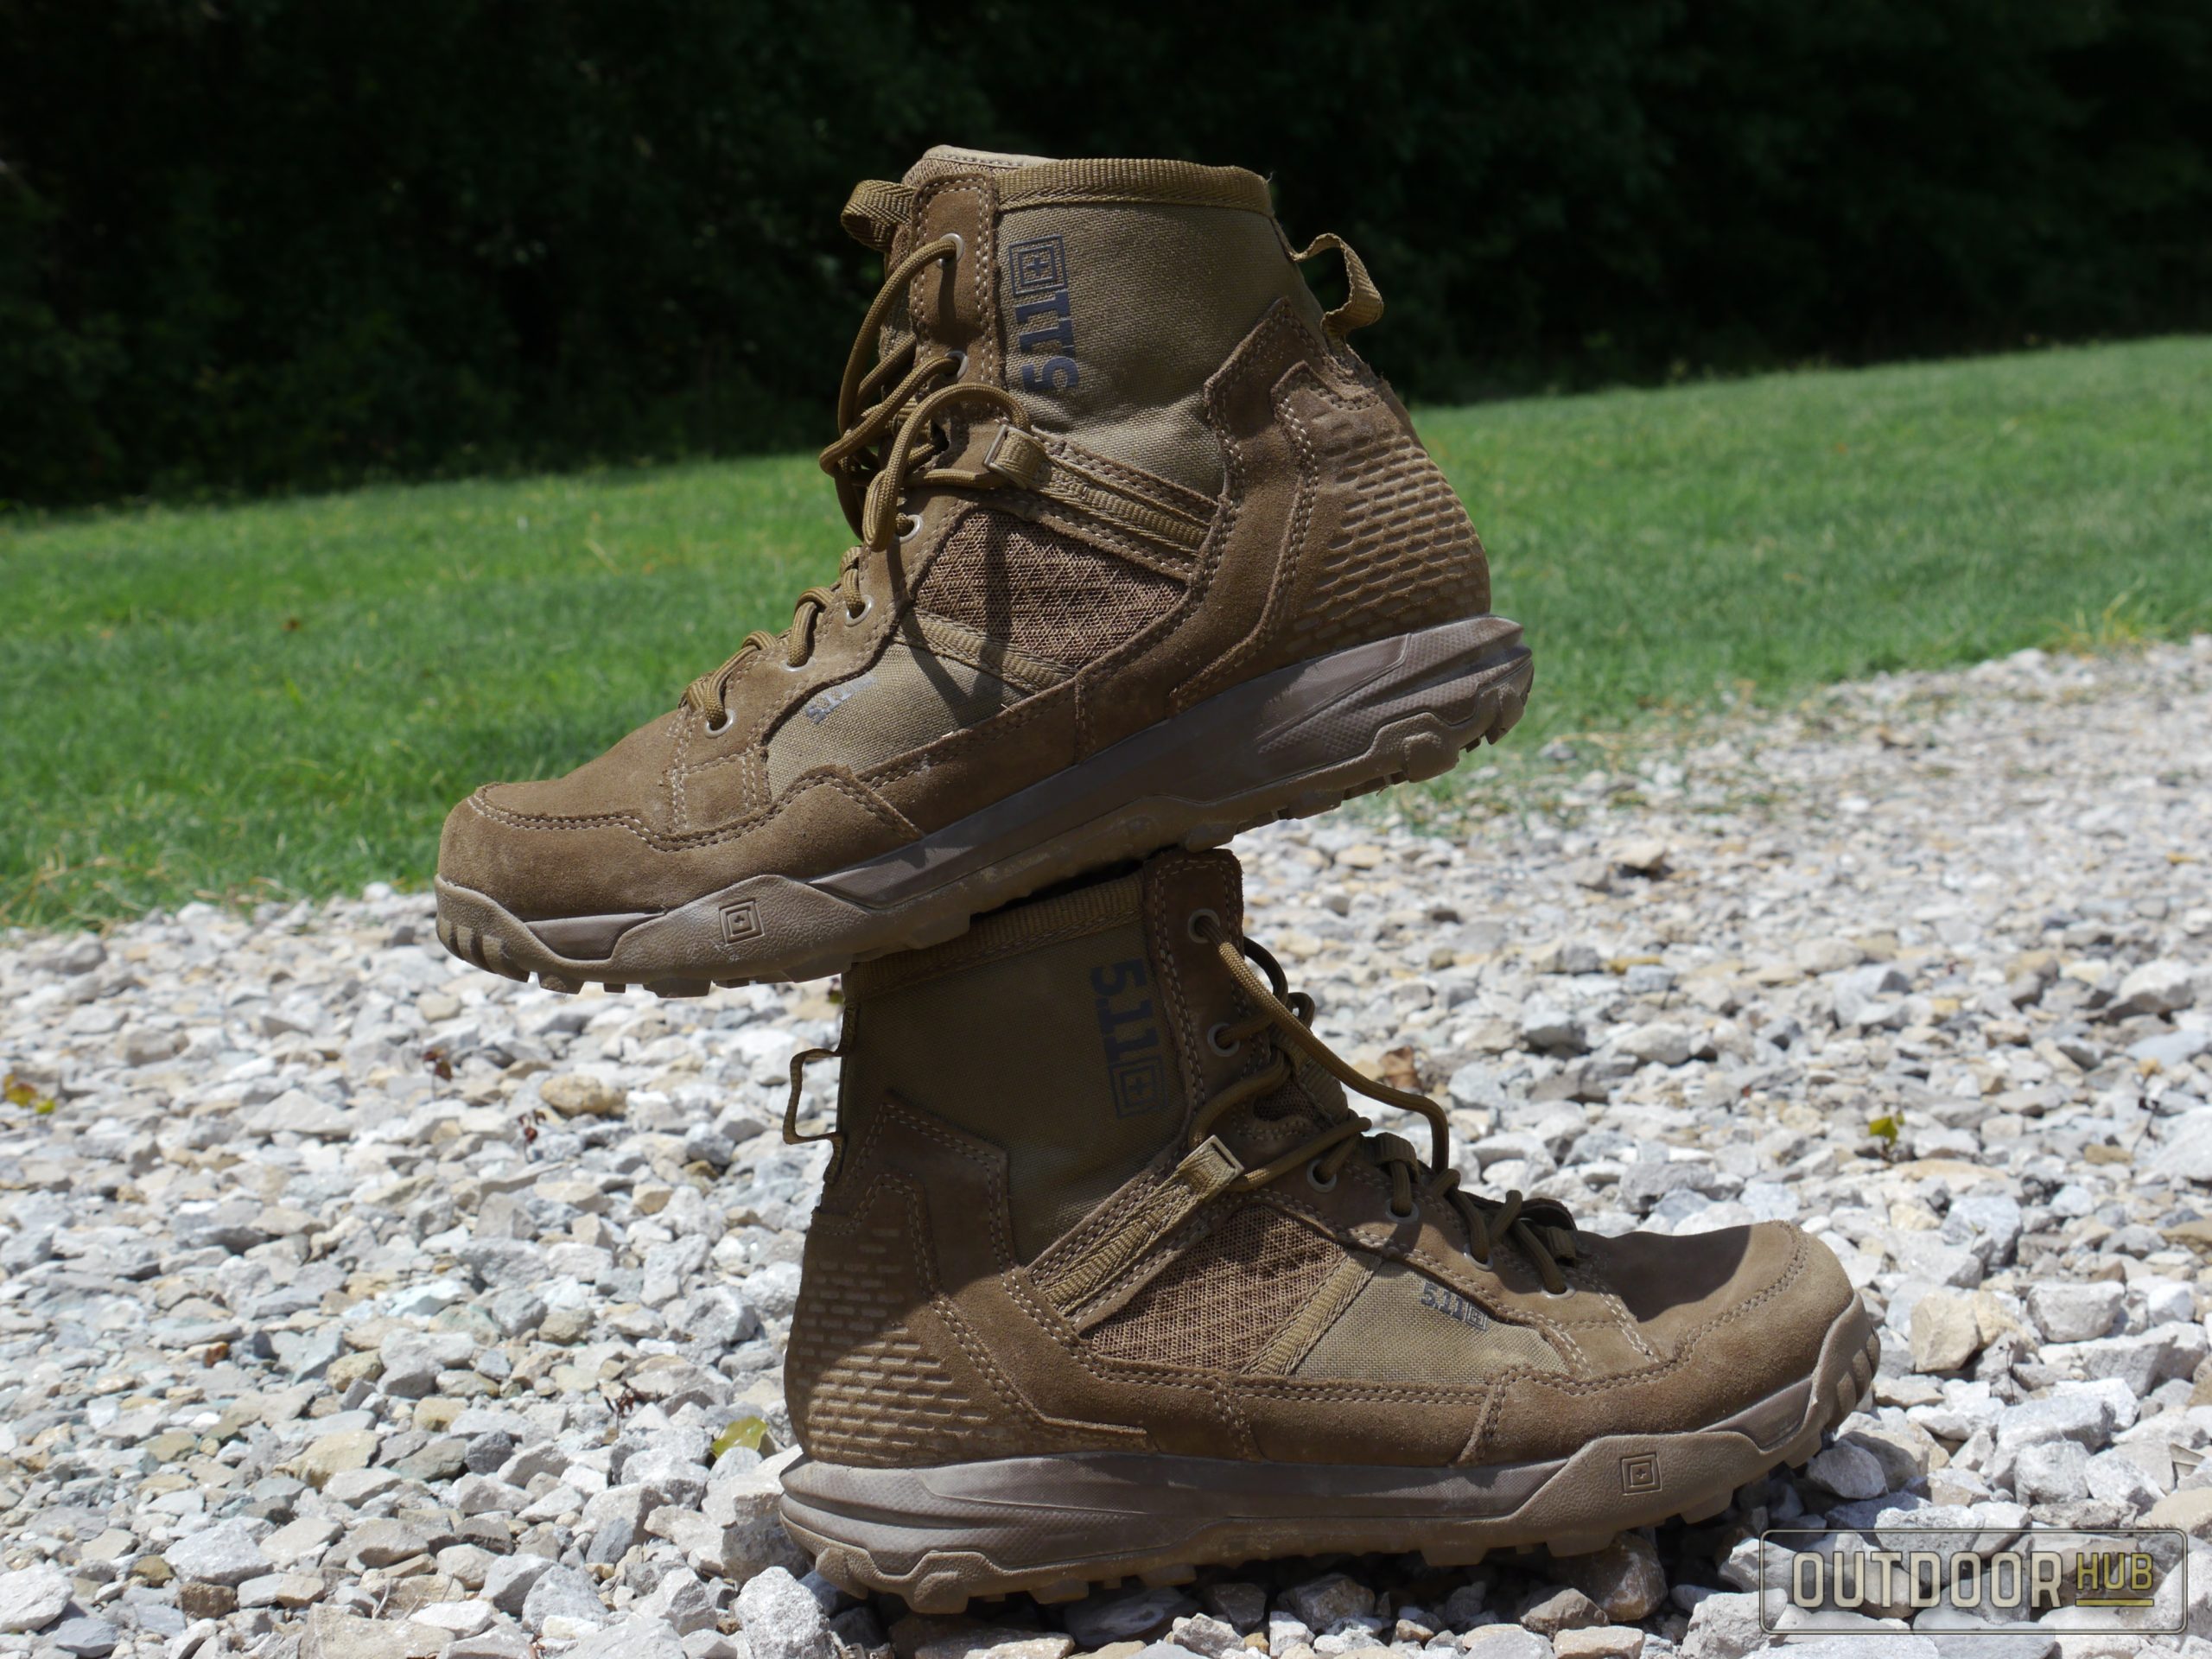 REVIEW: 5.11 A/T 6 Non-Zip Boots - Fire and Forget Boots?